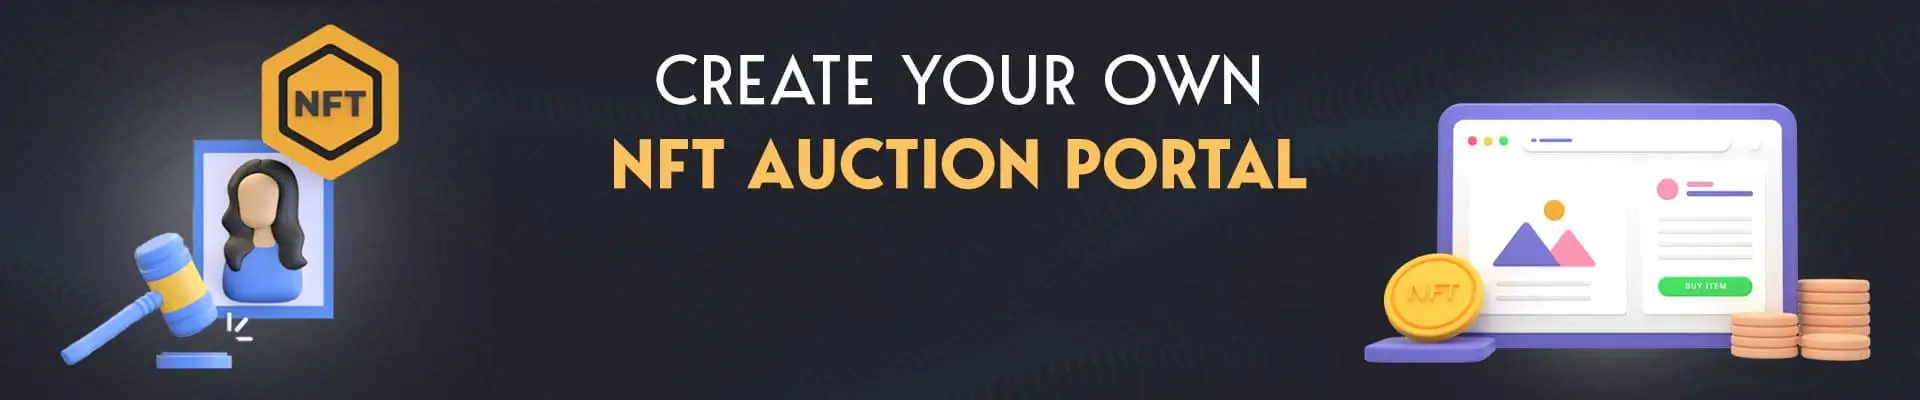 How to Create your own NFT Auction Portal?